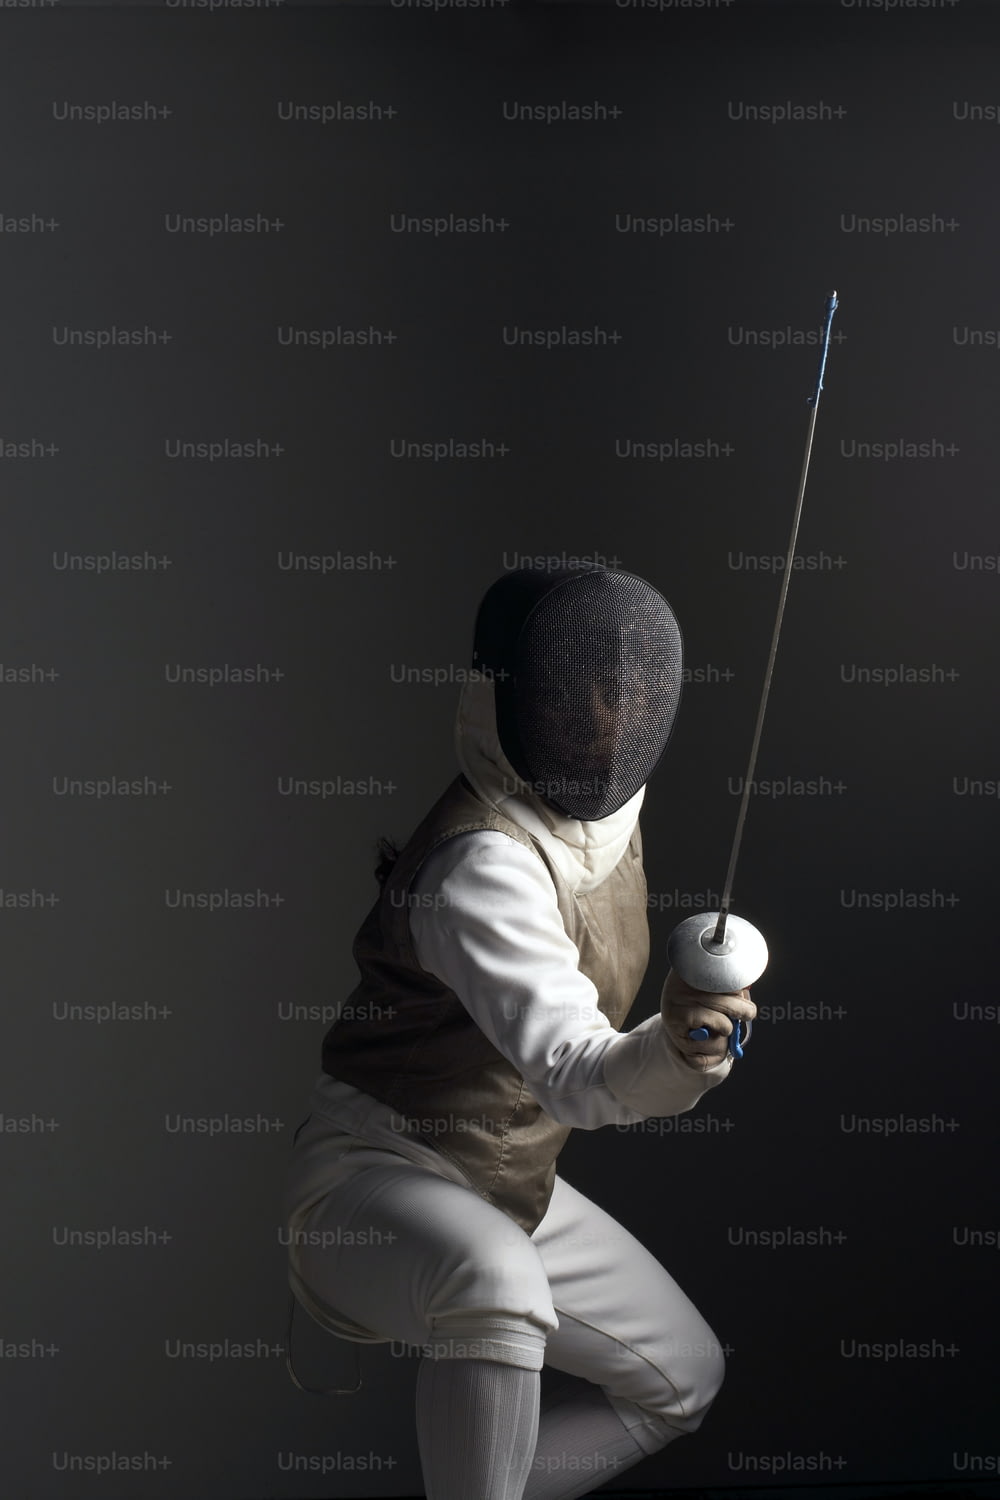 a man in a white suit holding a baseball bat